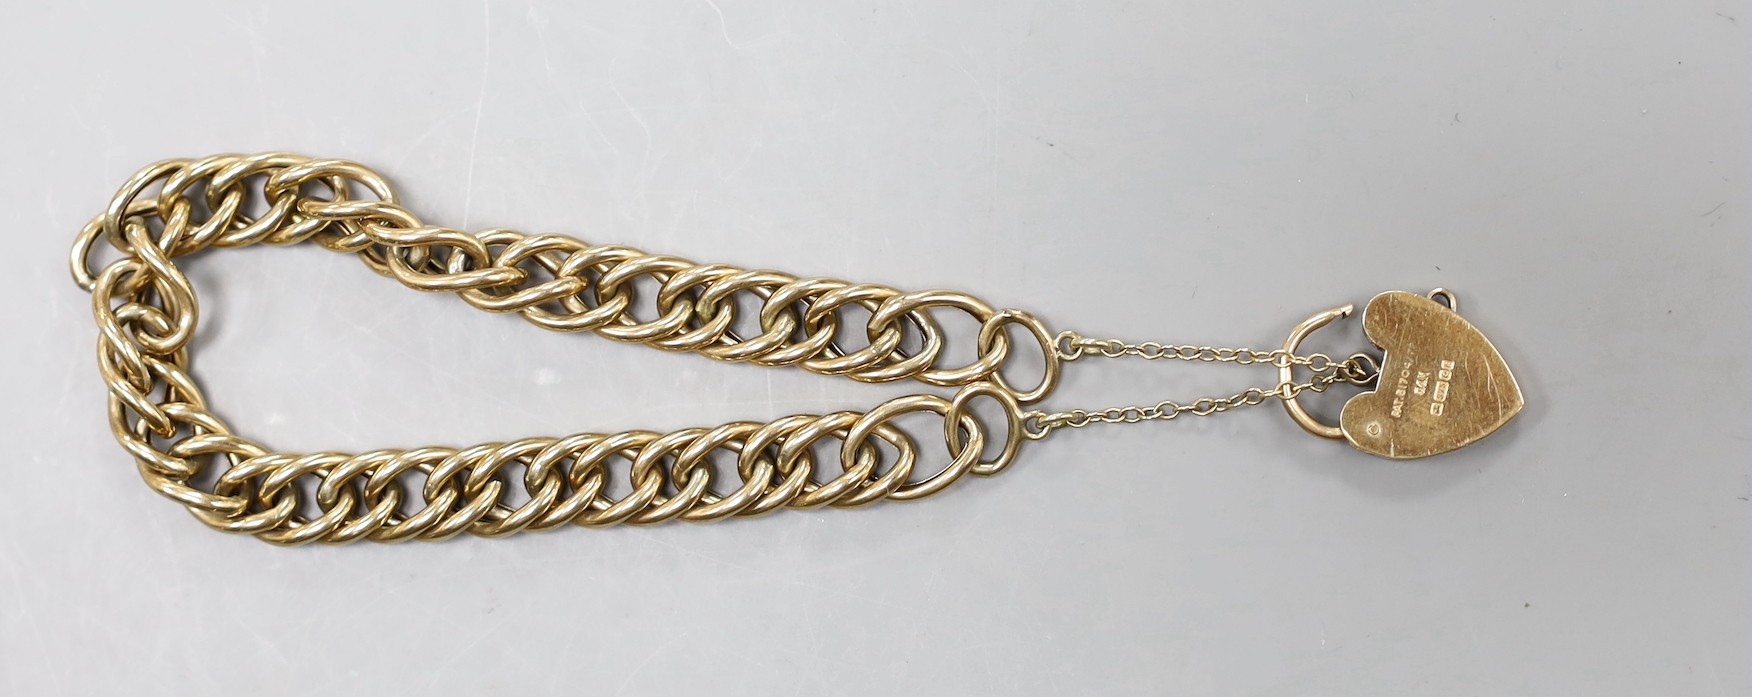 A 9ct gold oval link bracelet, with heart shaped padlock clasp, approximately 18cm